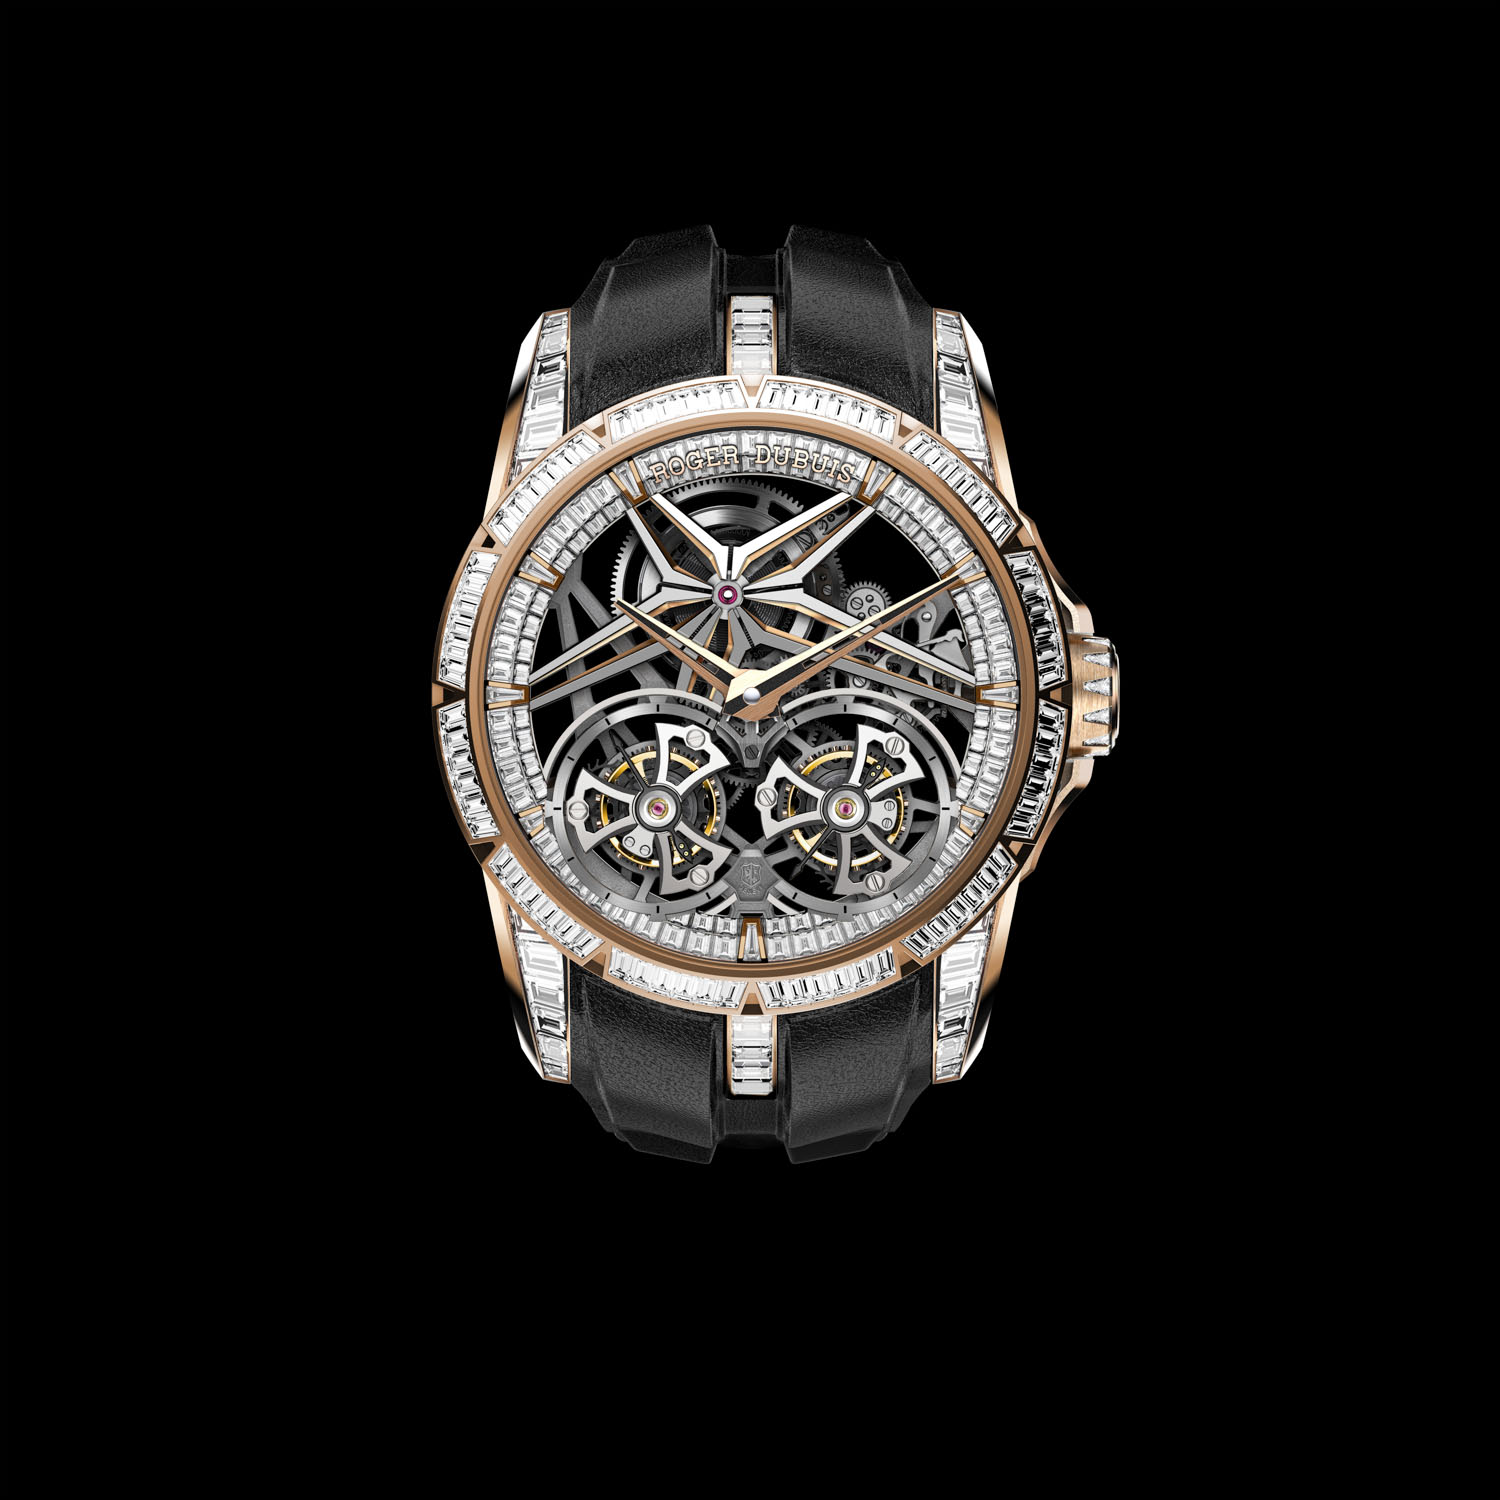 The 2021 Excalibur Double Flying Tourbillon starts off with the ref. RDDBEX0822 in a 45mm pink gold case with its bezel and crown set with baguette diamonds (Limited edition of 8 pieces)